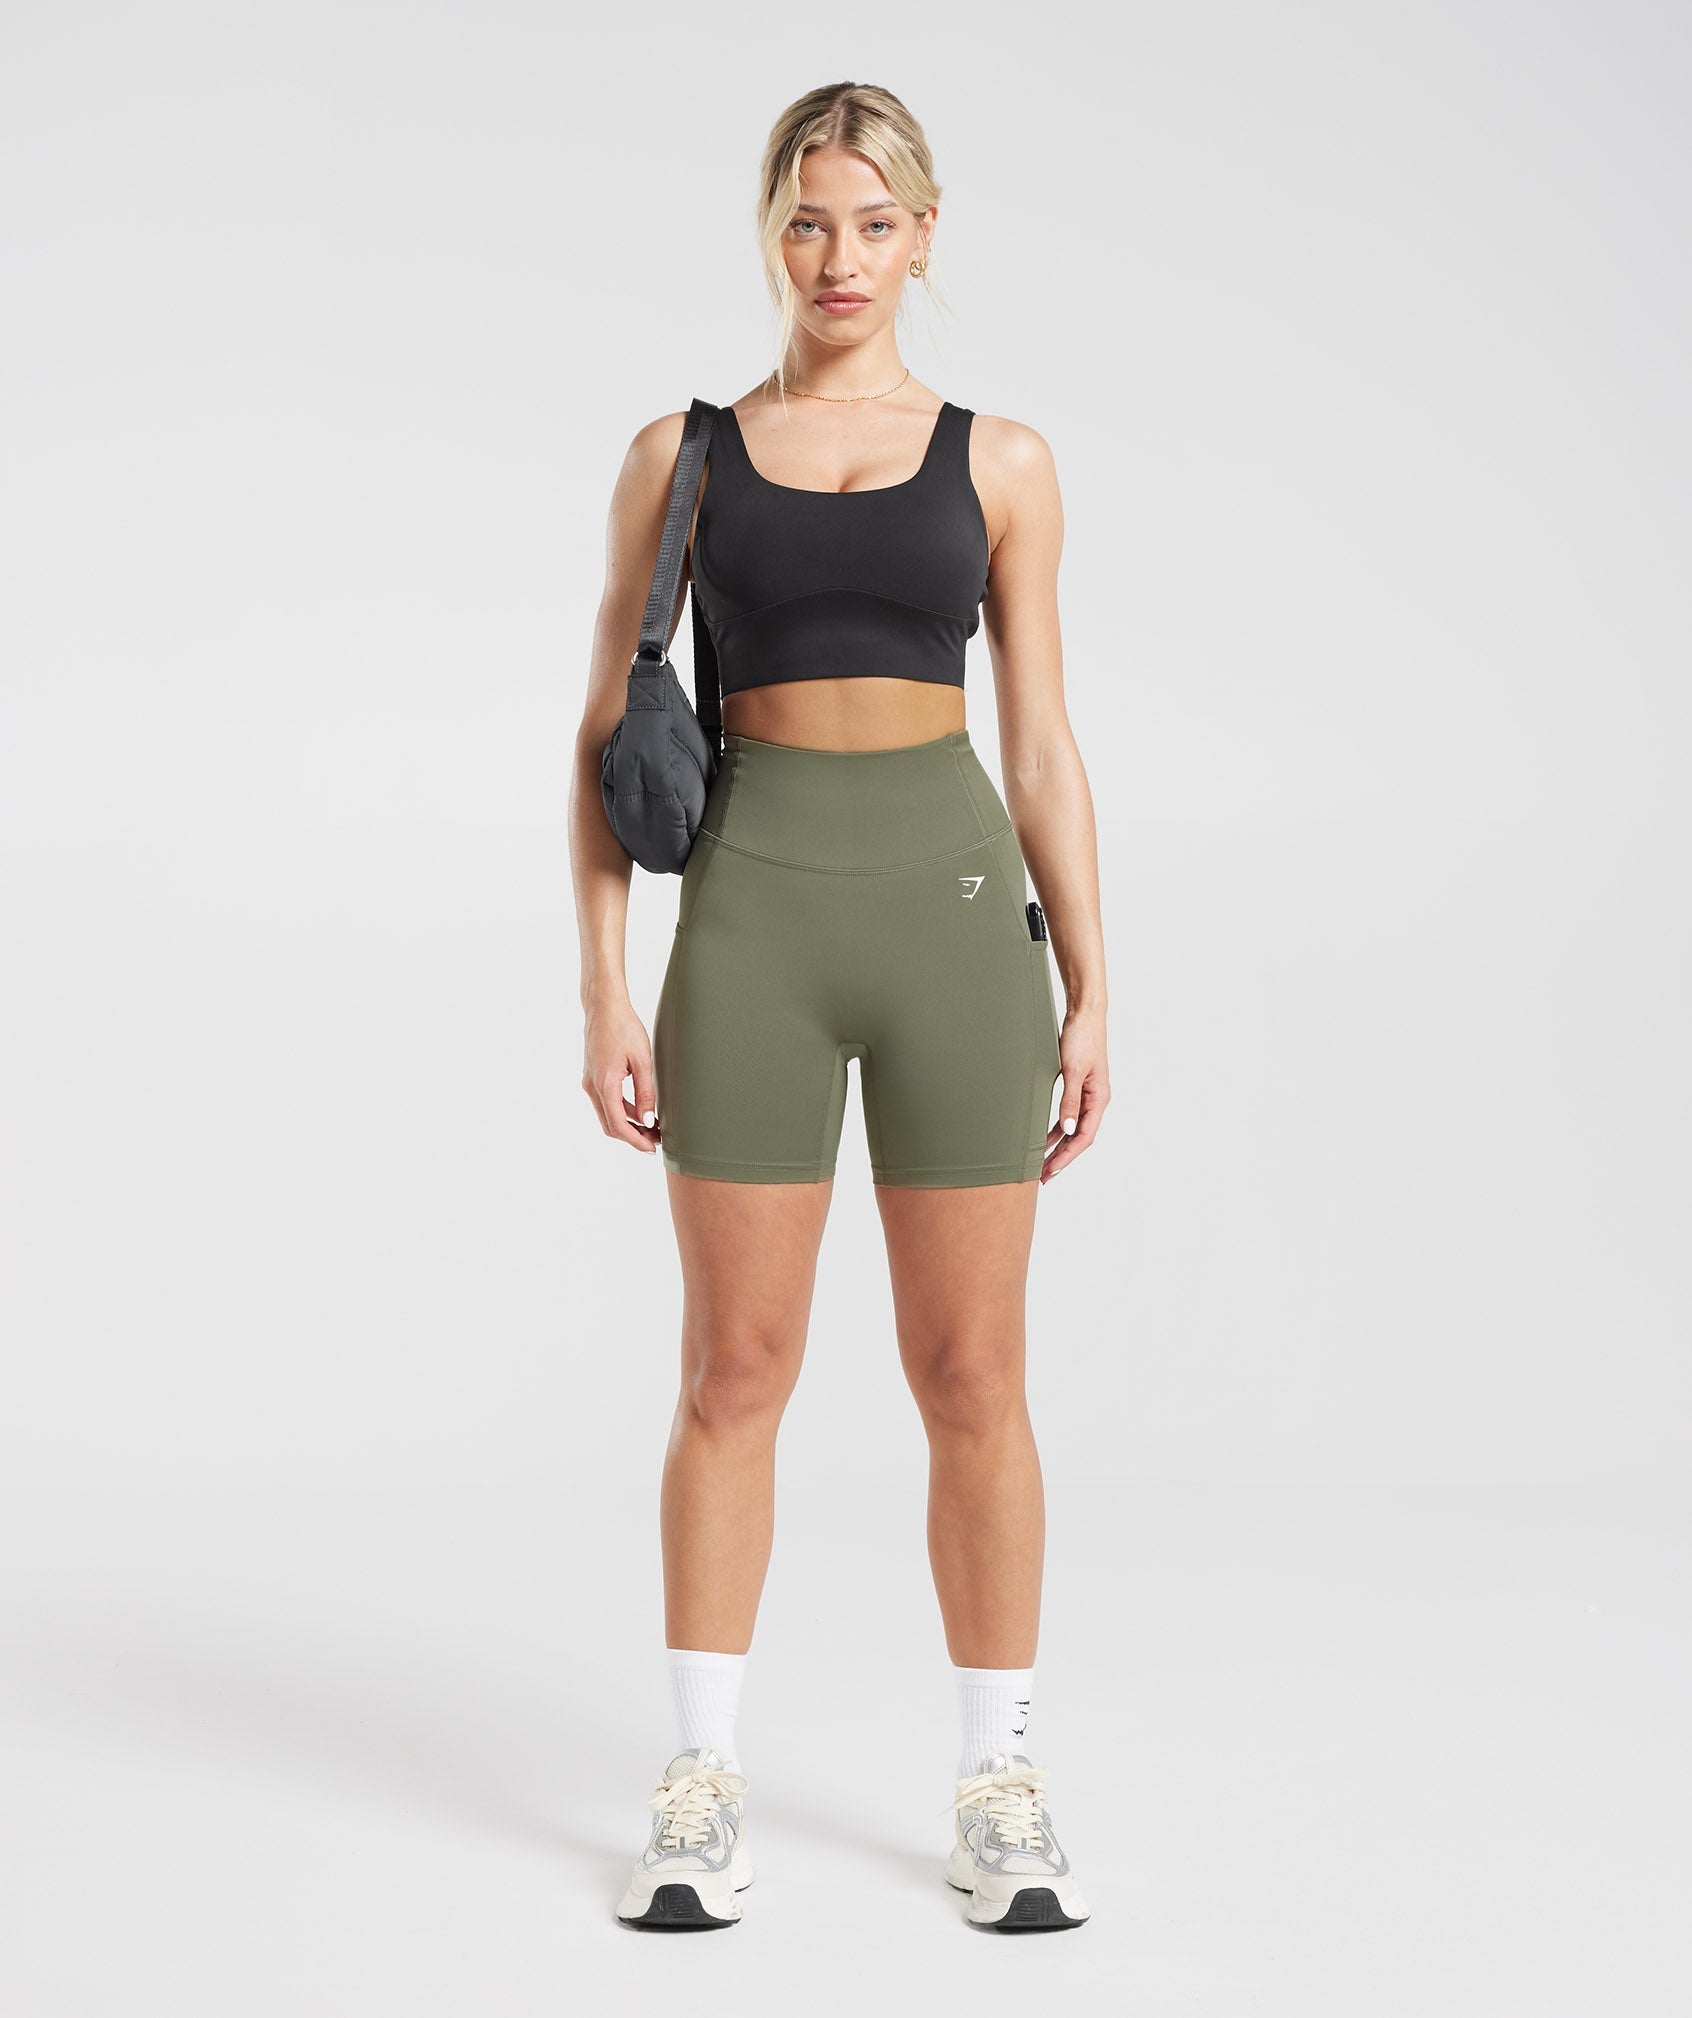 Pocket Shorts in Dusty Olive - view 4